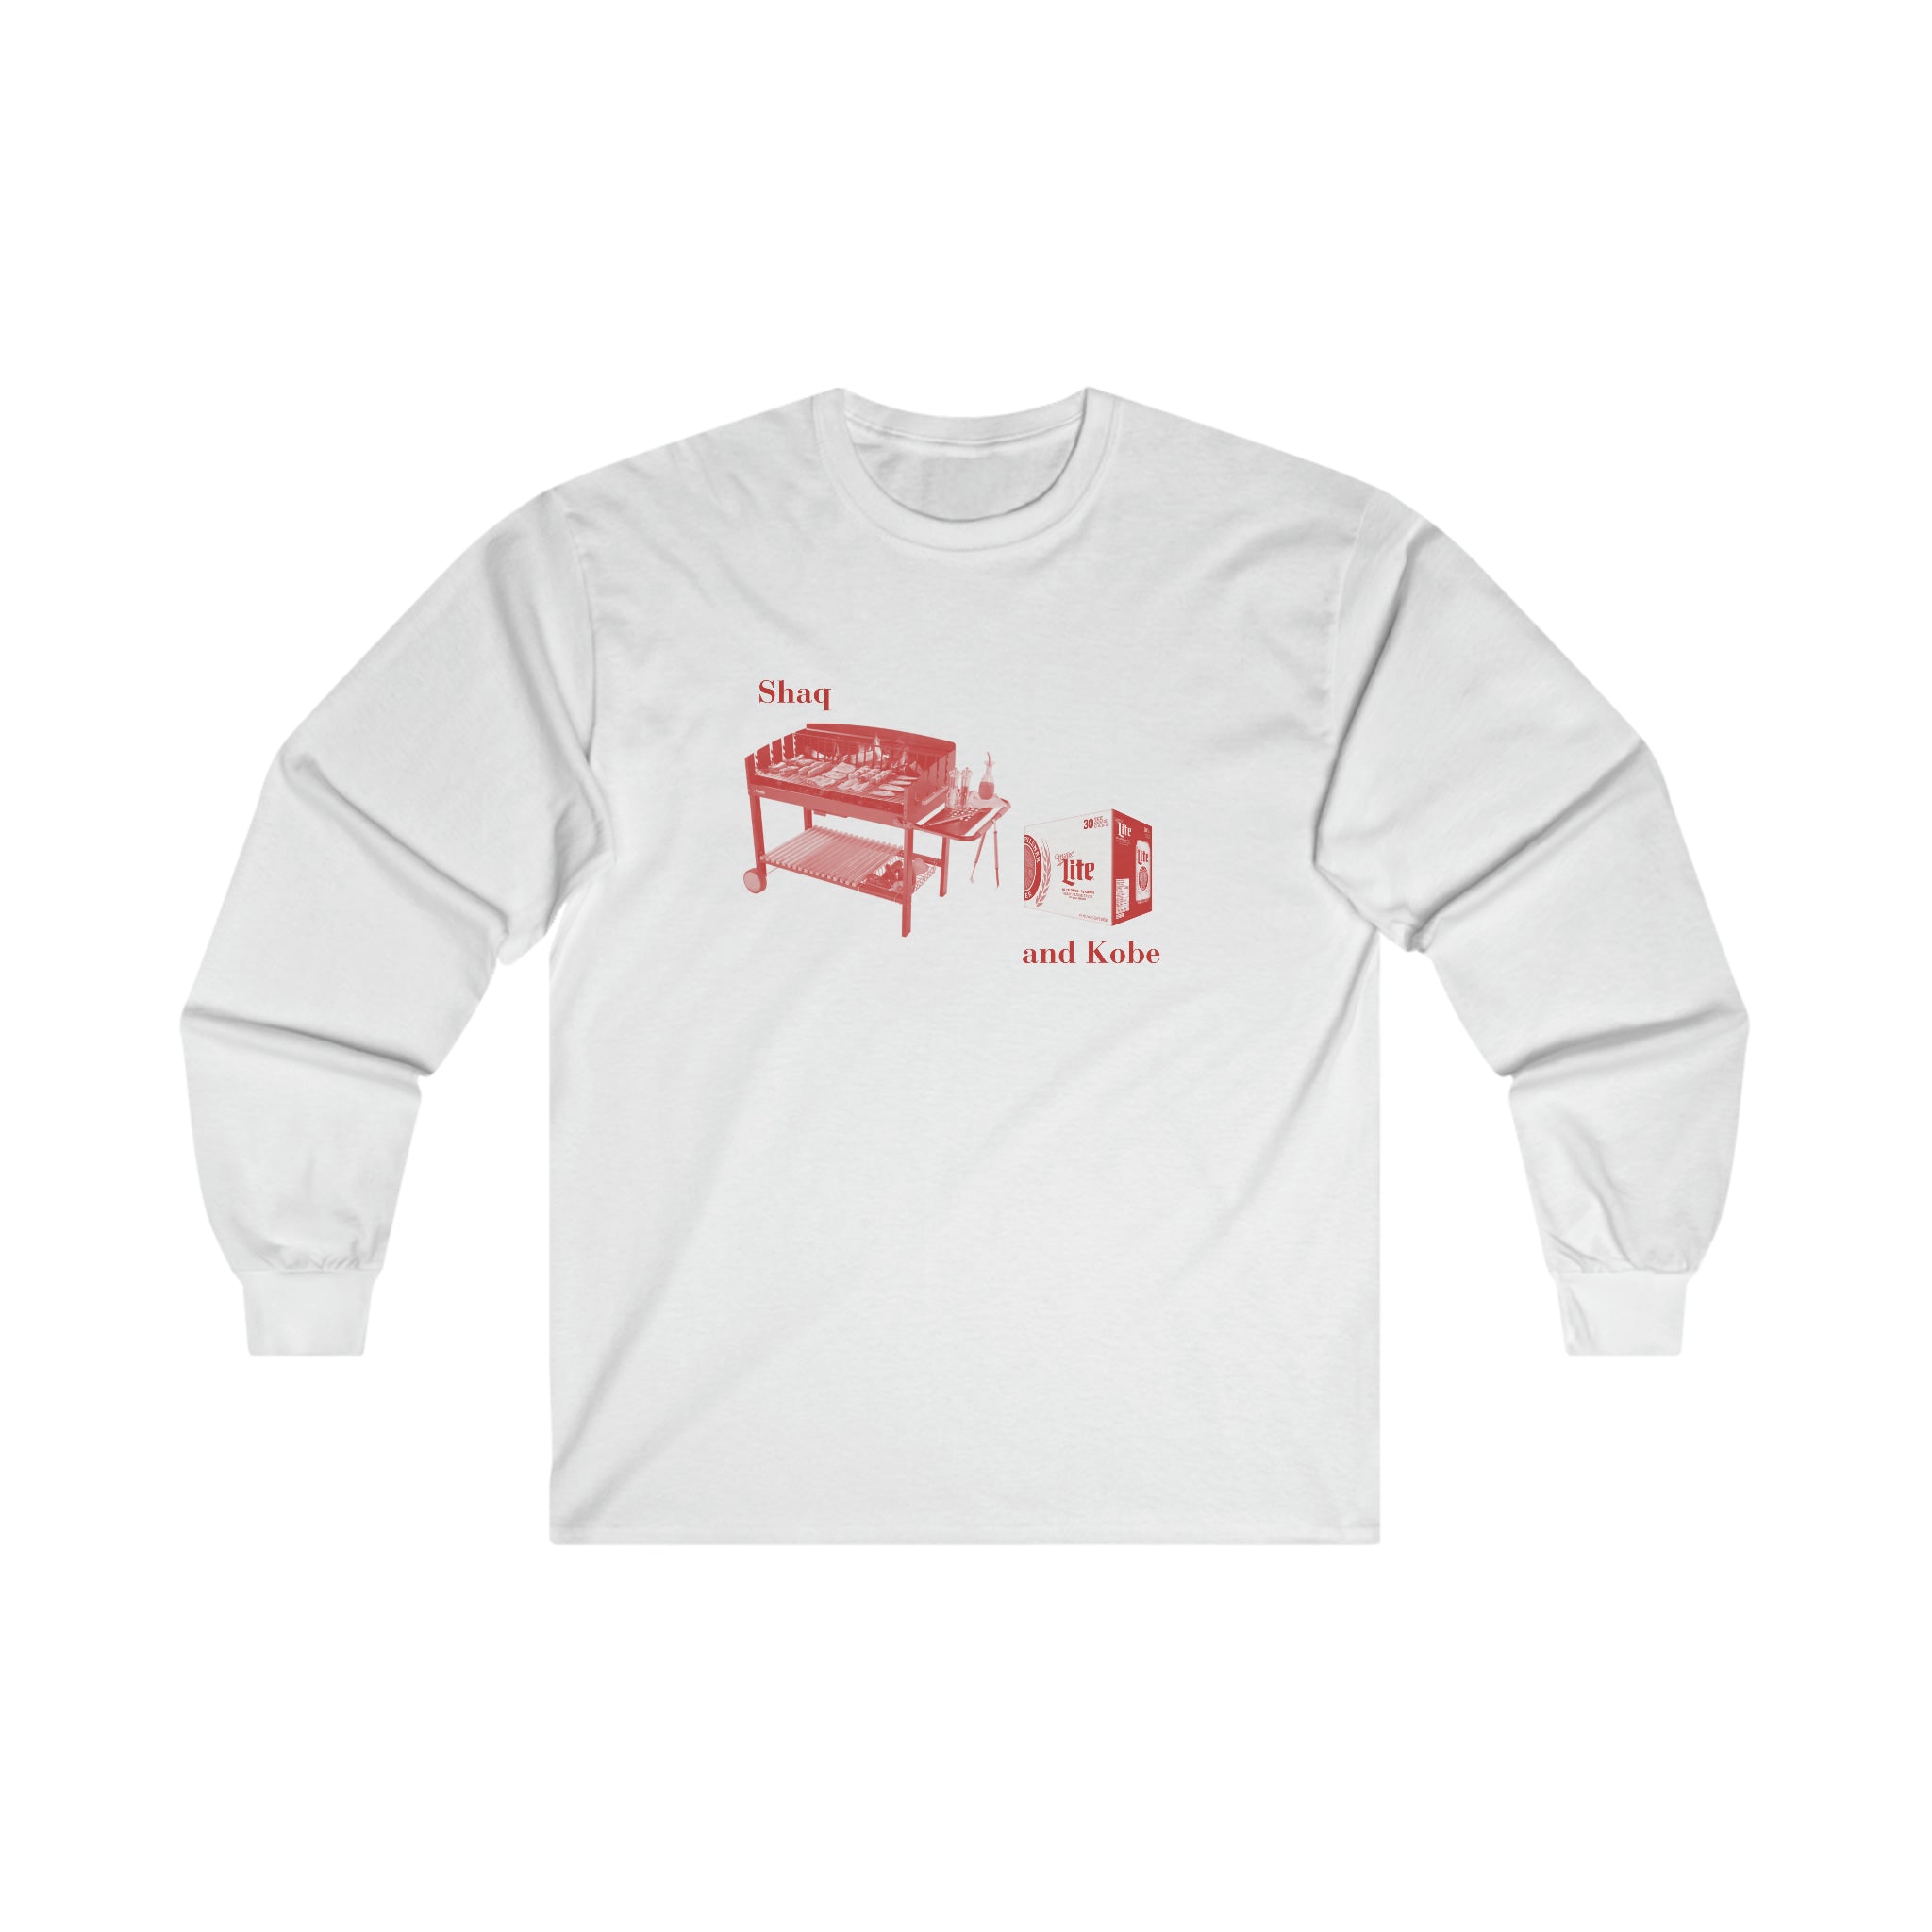 Shaq and Kobe Barbecue and 30 rack - Ultra Cotton Long Sleeve Tee